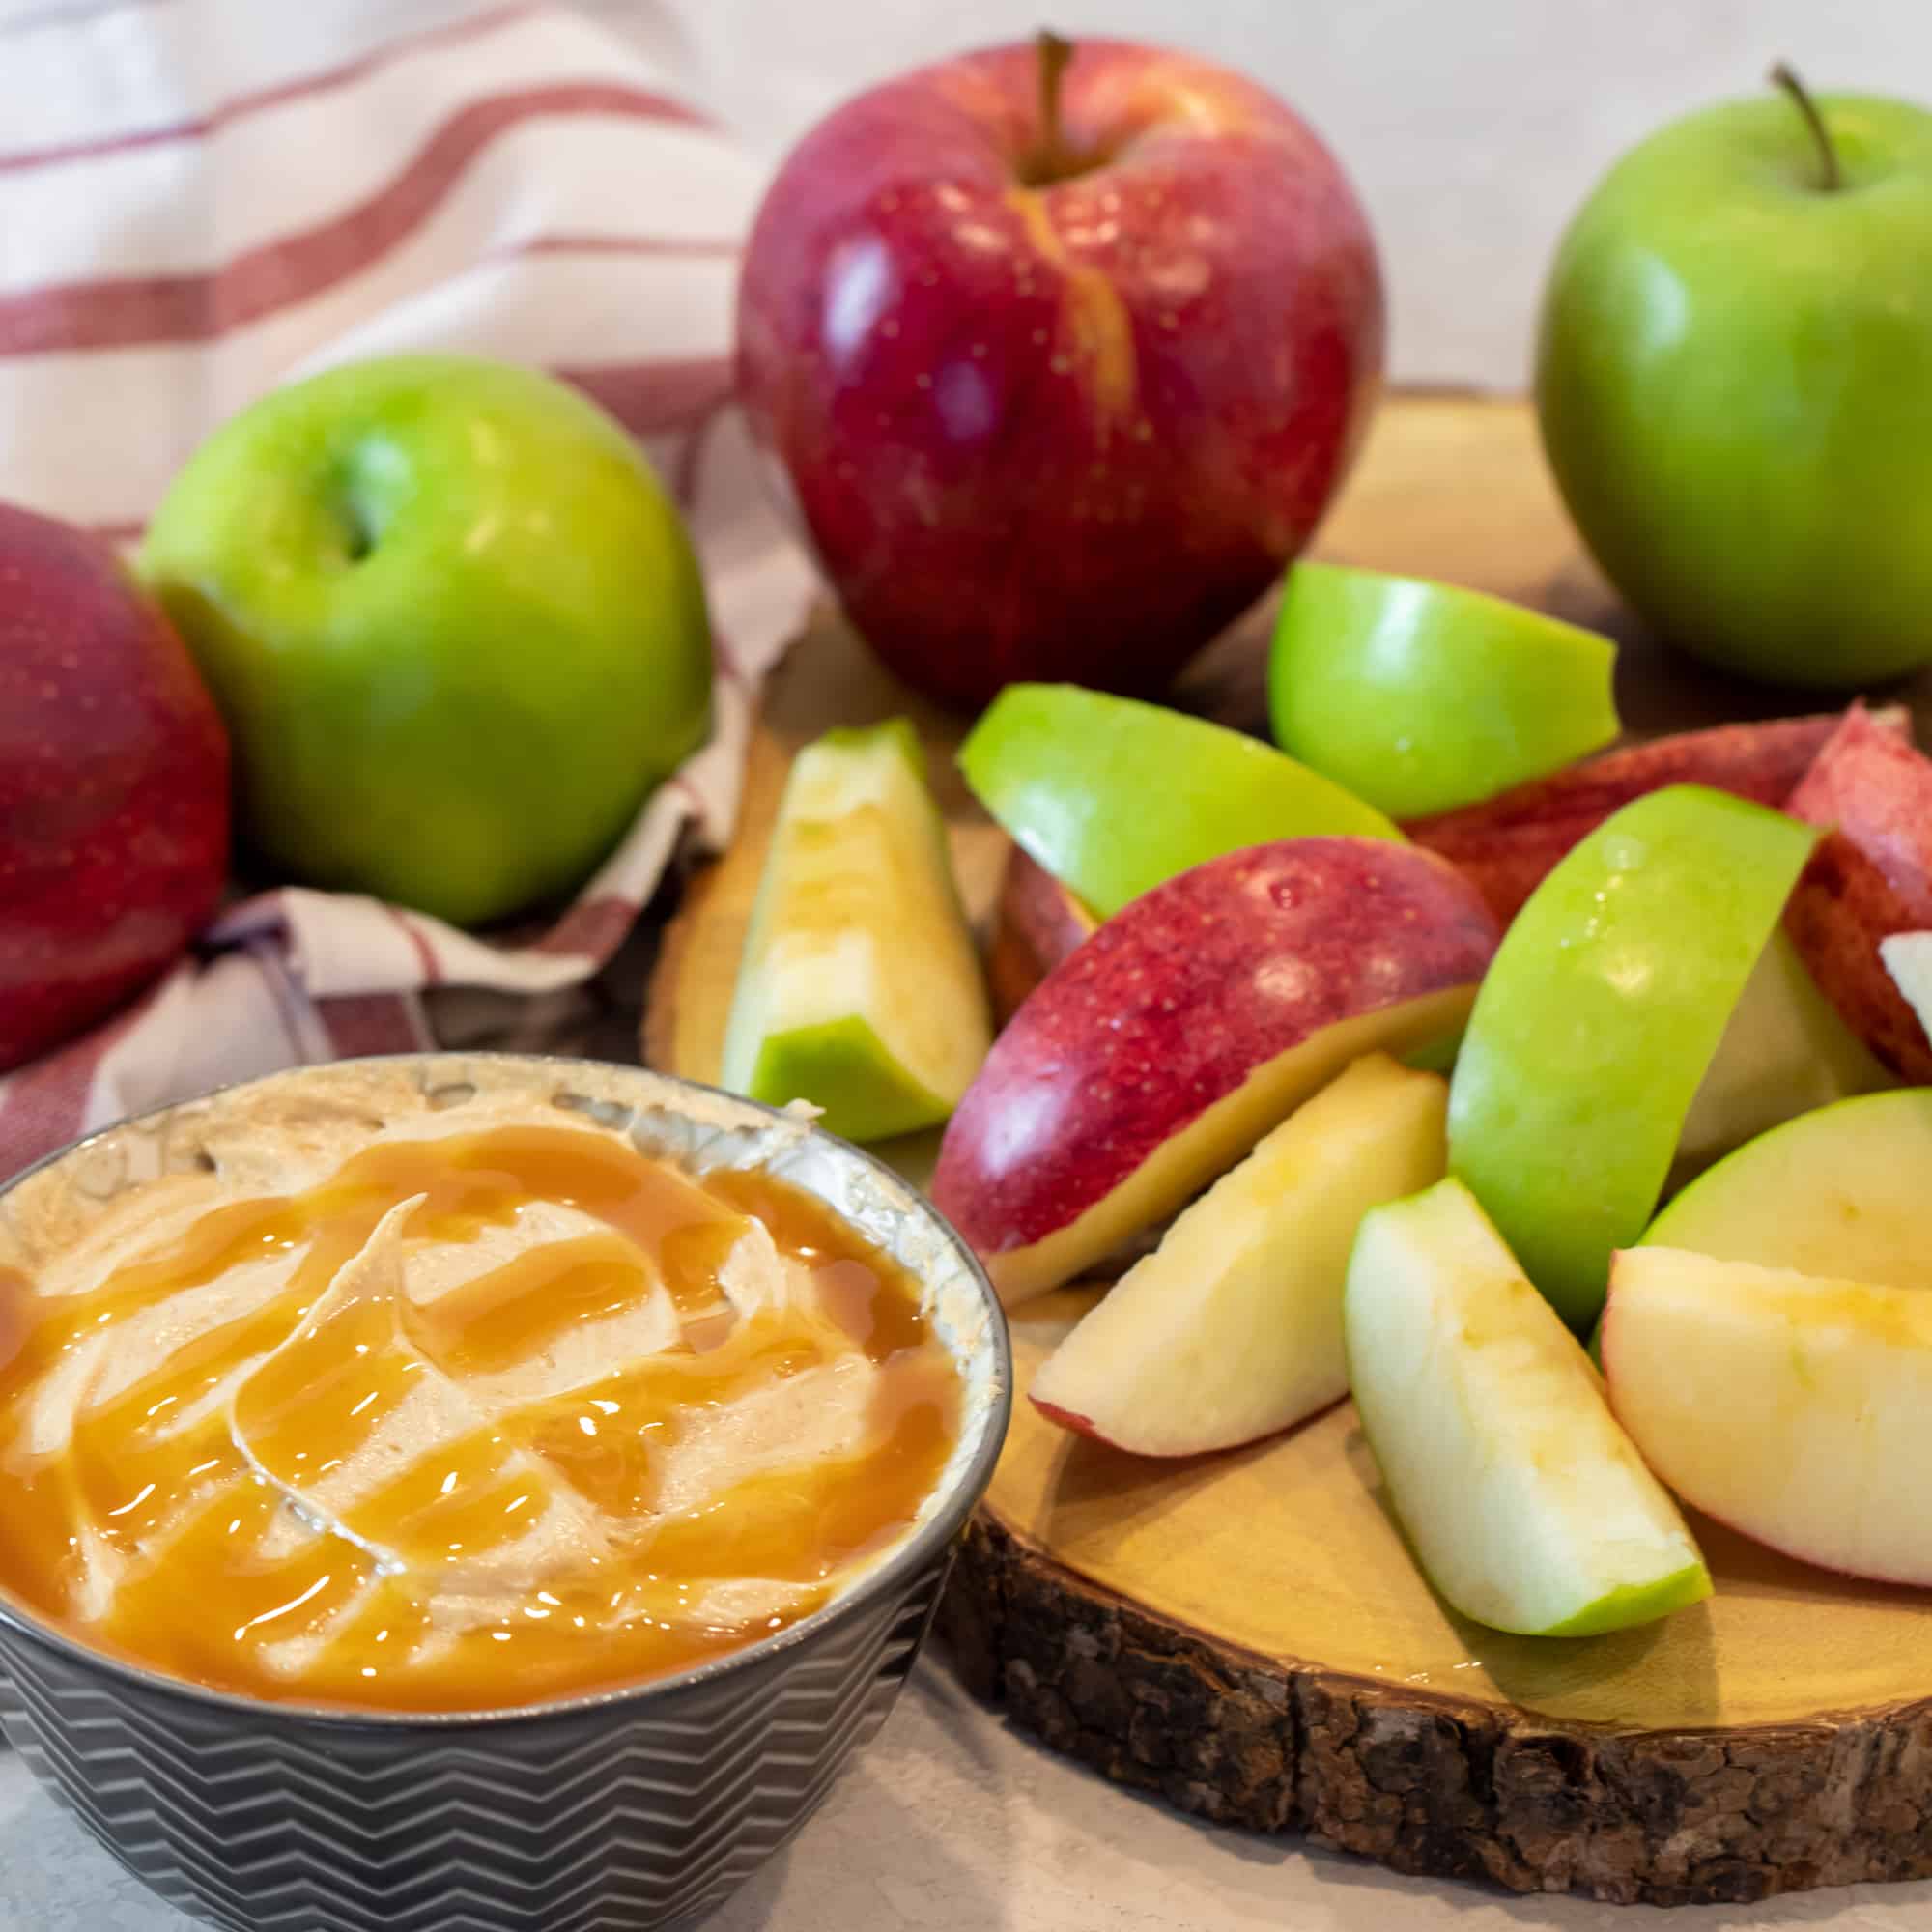 Overhead picture of a pile of sliced apples next to a bowl of caramel spread.